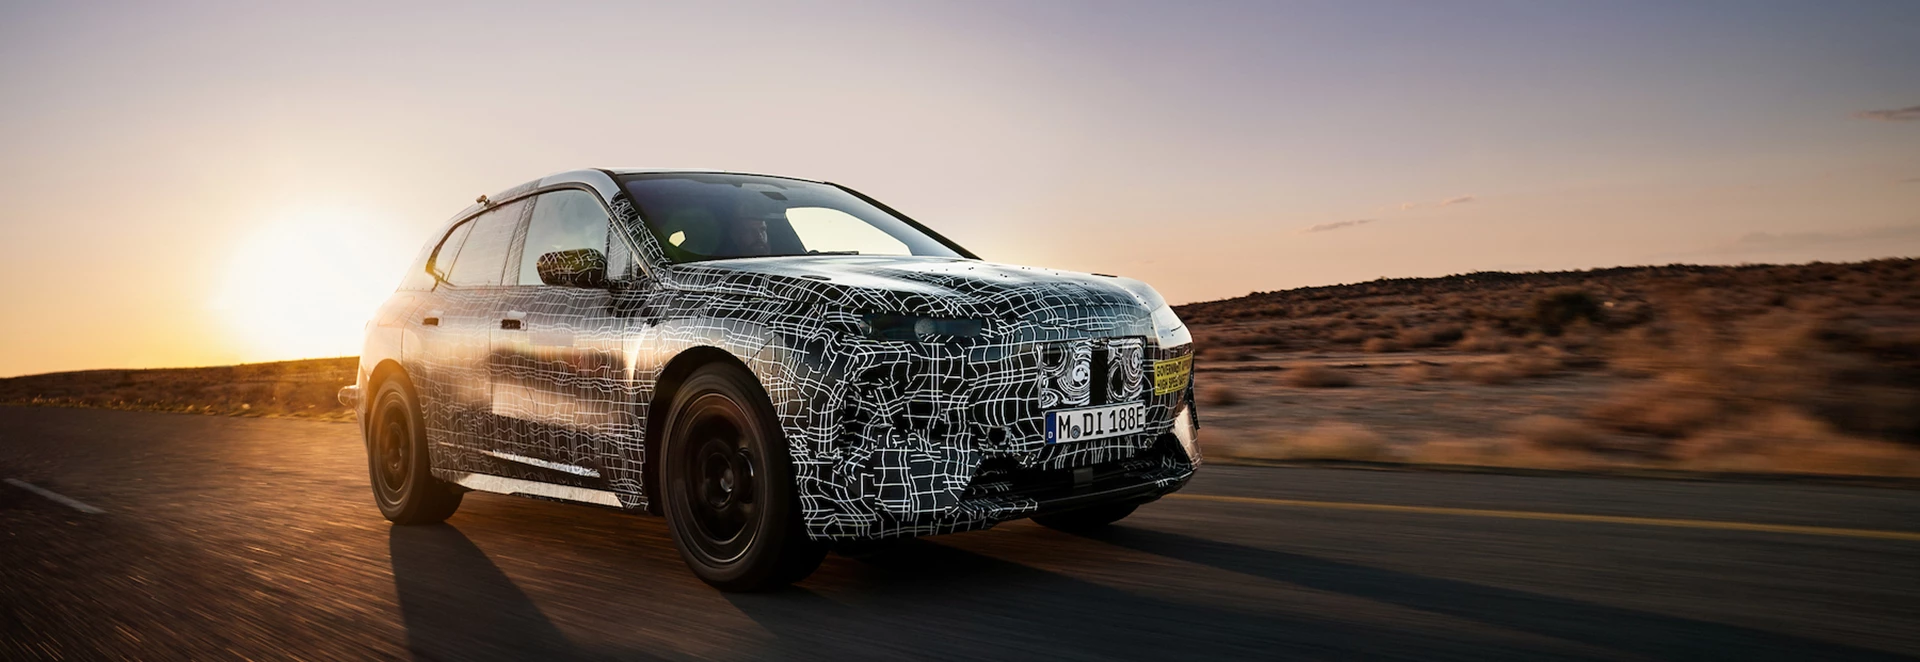 BMW to debut new electric iNEXT SUV on November 11 